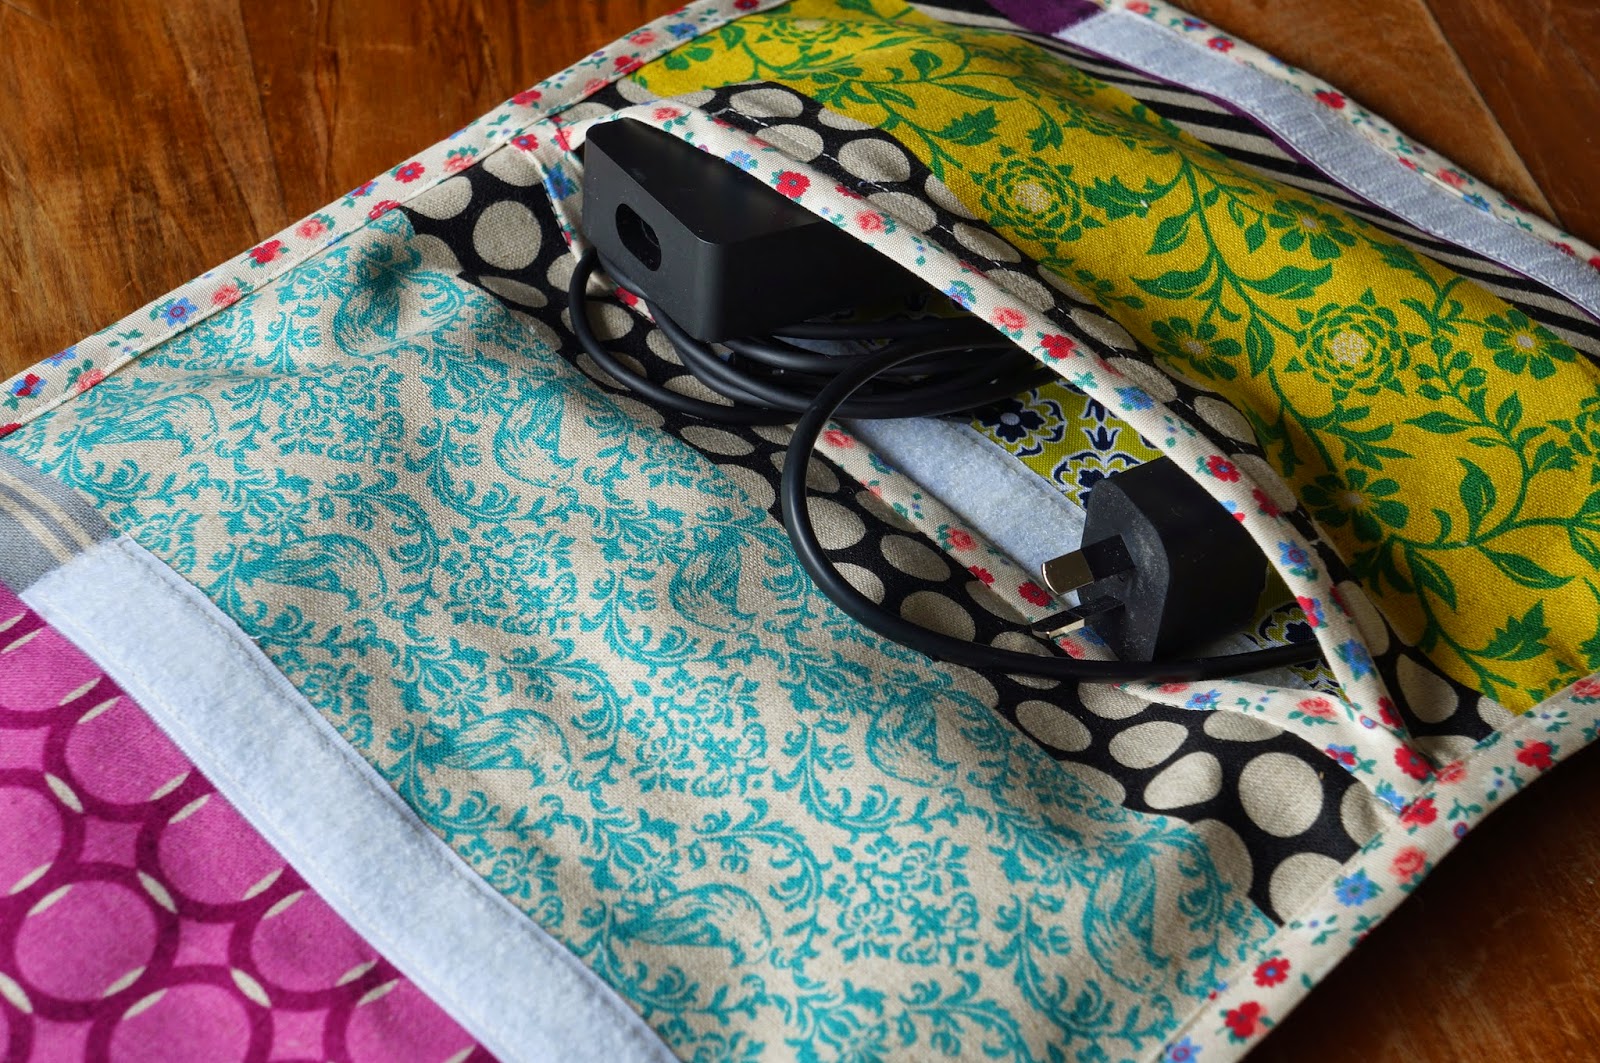 Crafty Cake Creative: Make your own cute laptop or tablet bag